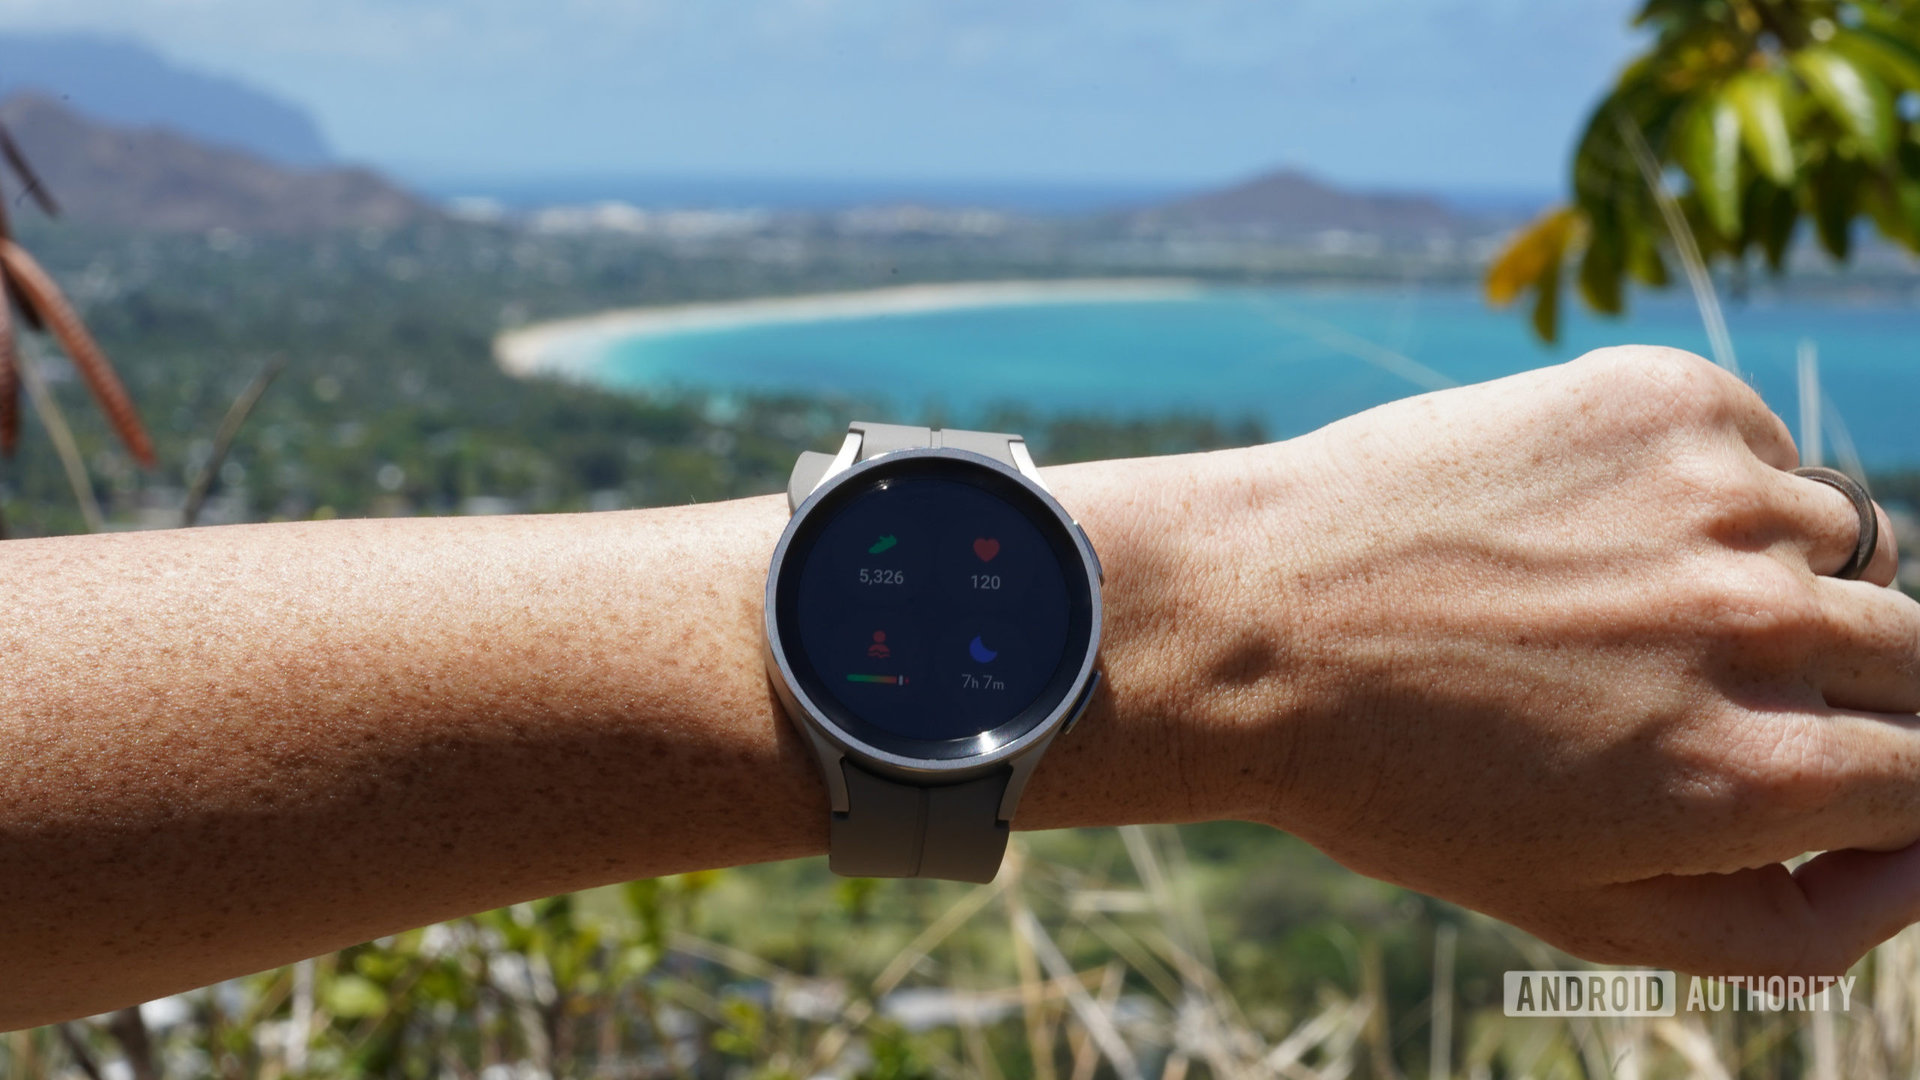 A Samsung Galaxy Watch 5 Pro displays a user's basic stats including step count, sleep data, heart rate, and stress.